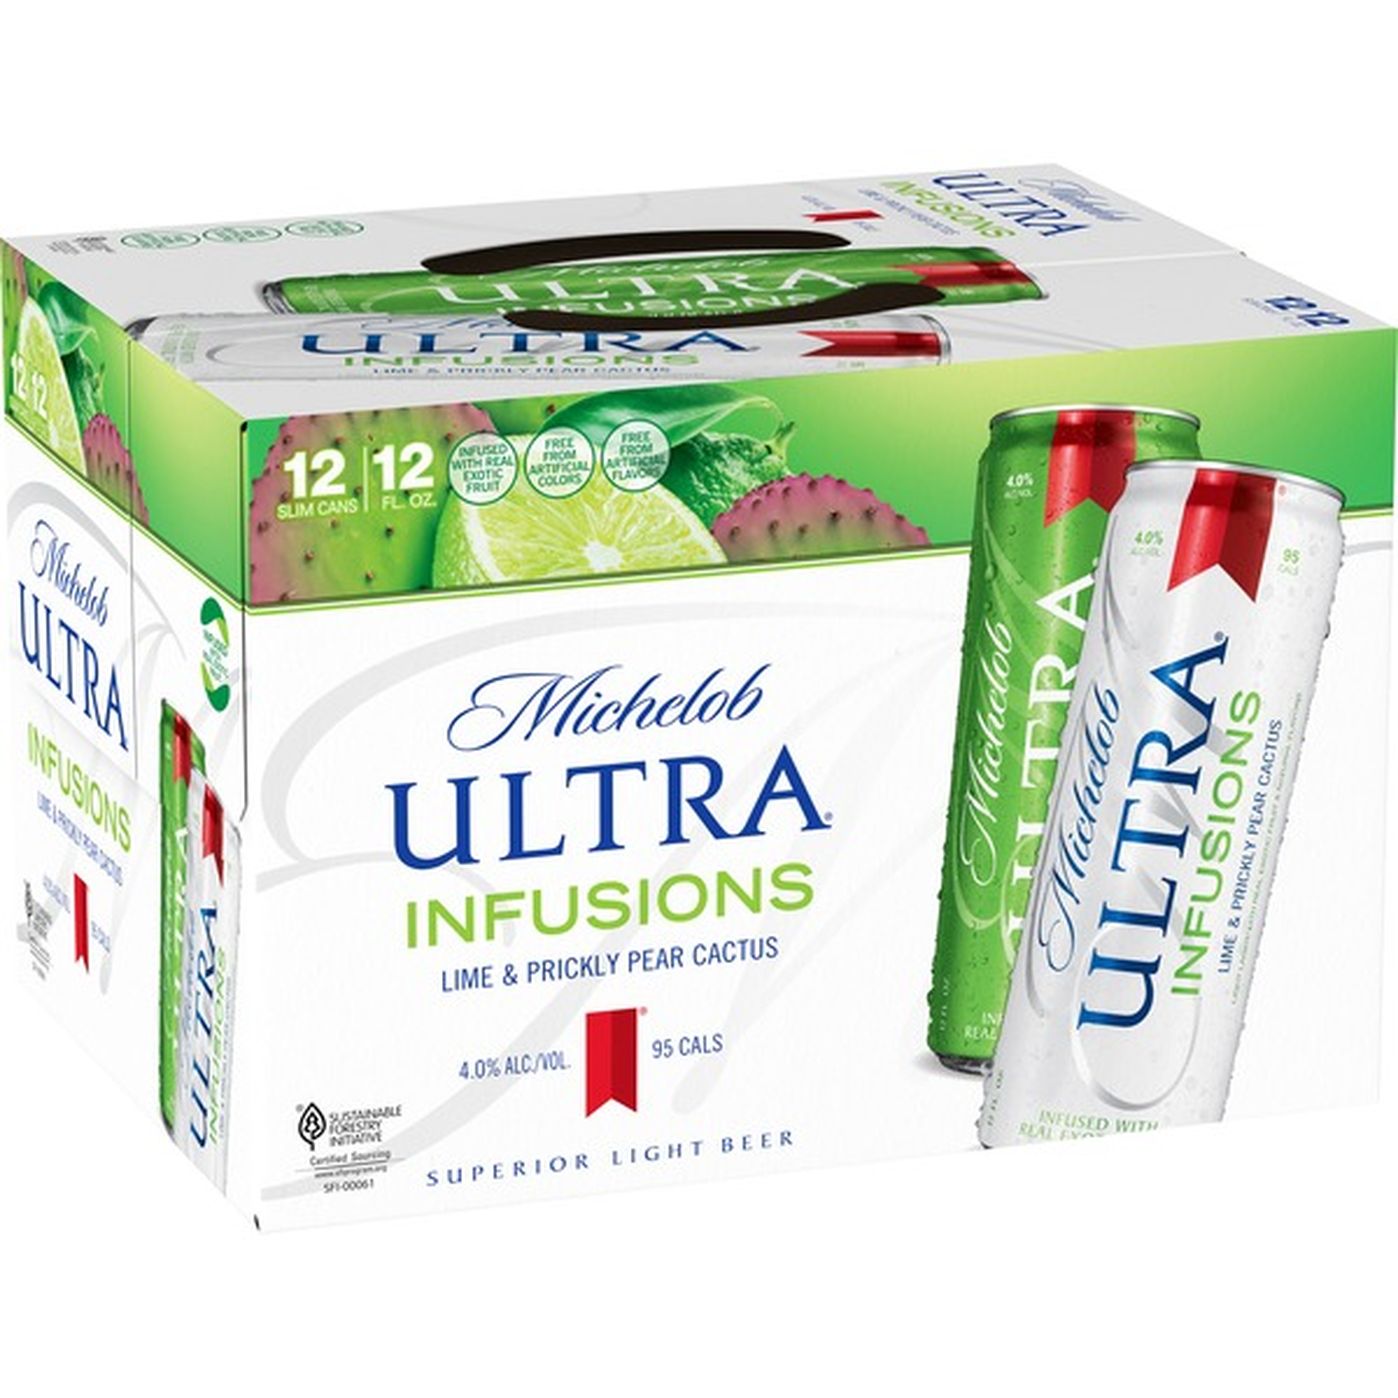 michelob-ultra-infusions-lime-prickly-pear-cactus-light-beer-cans-12